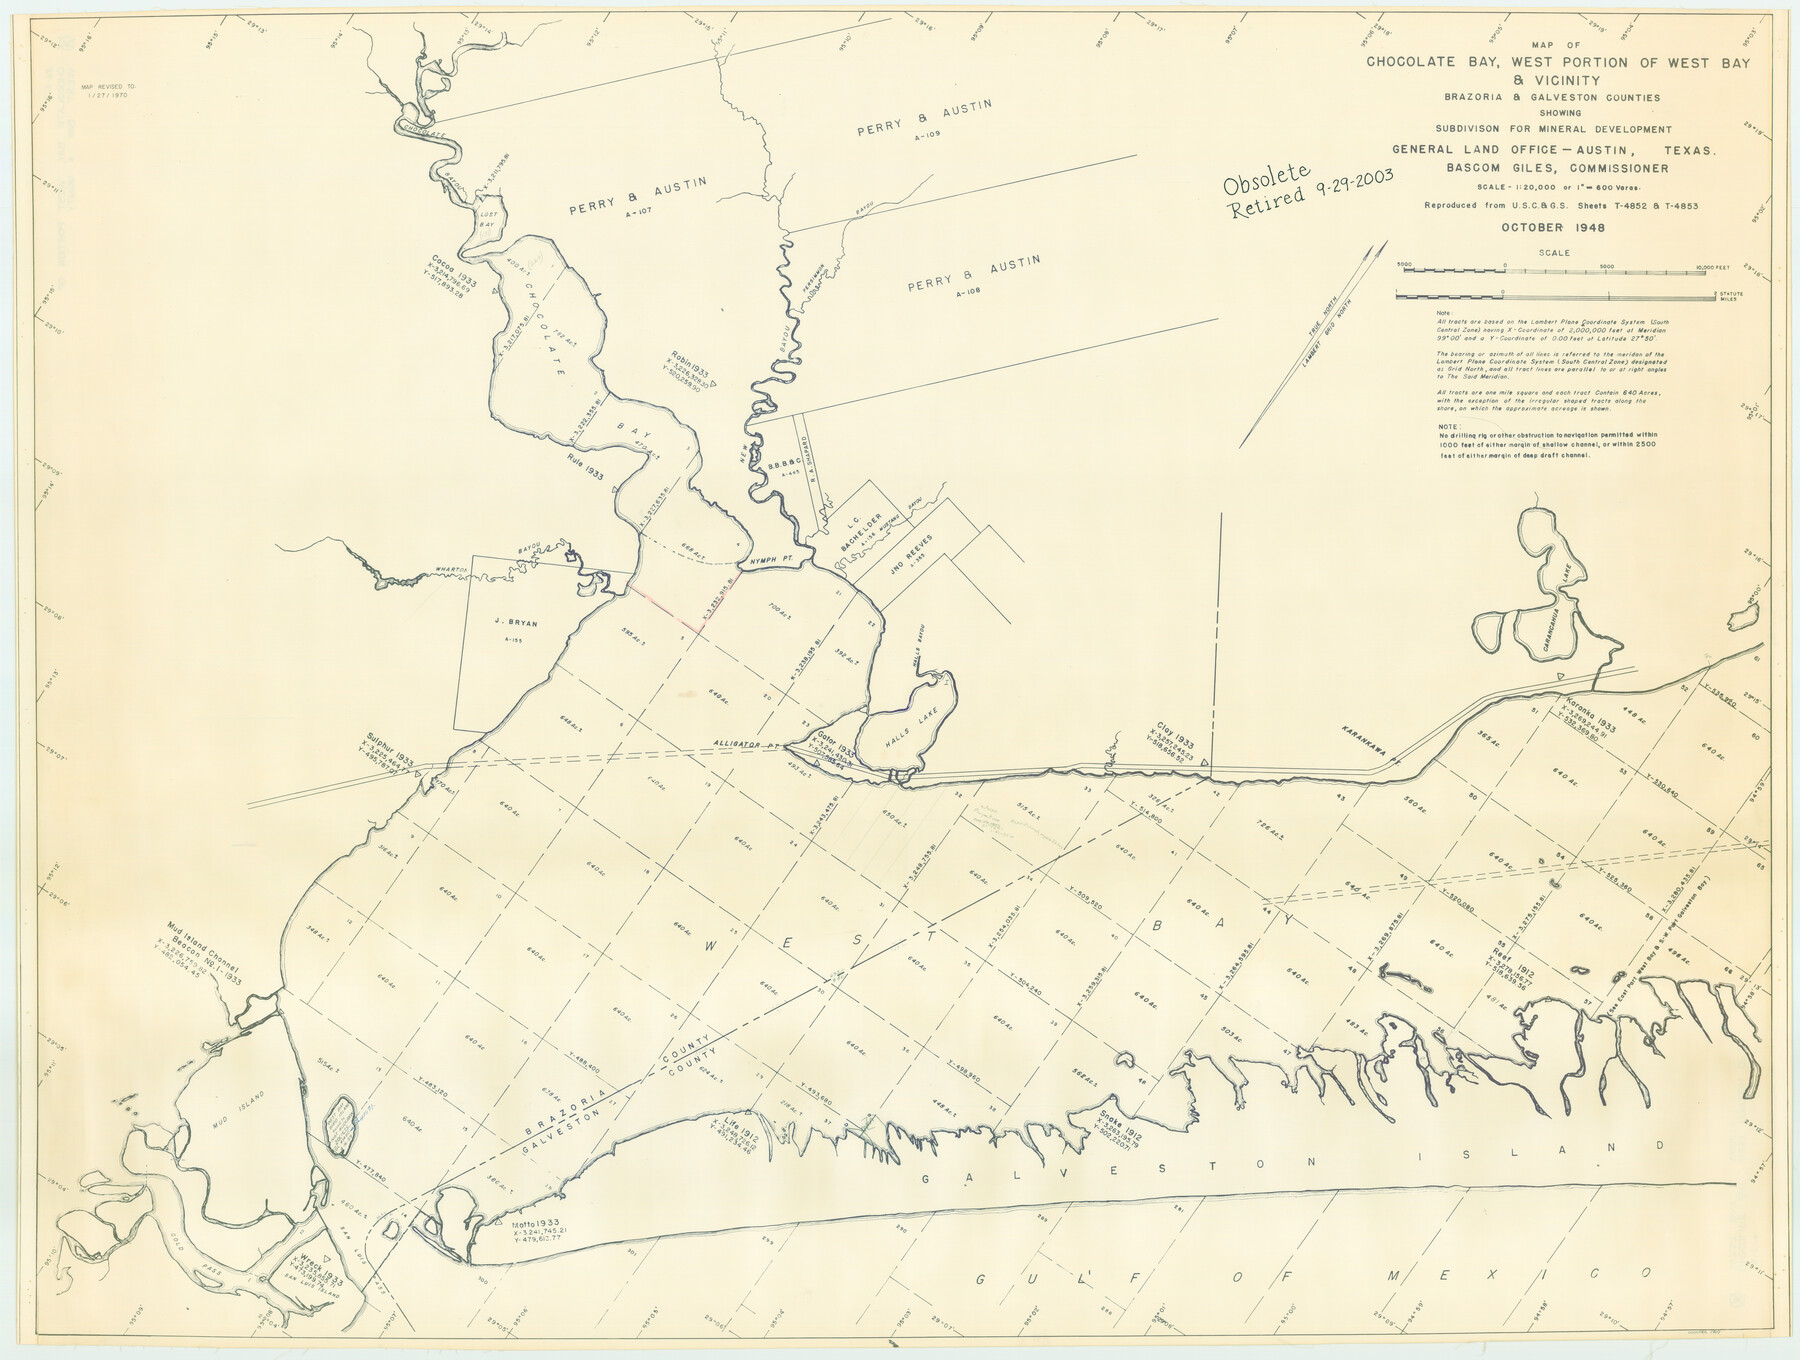 1907, Chocolate Bay, West Portion of West Bay and Vicinity, Brazoria and Galveston Counties, showing Subdivision for Mineral Development, General Map Collection